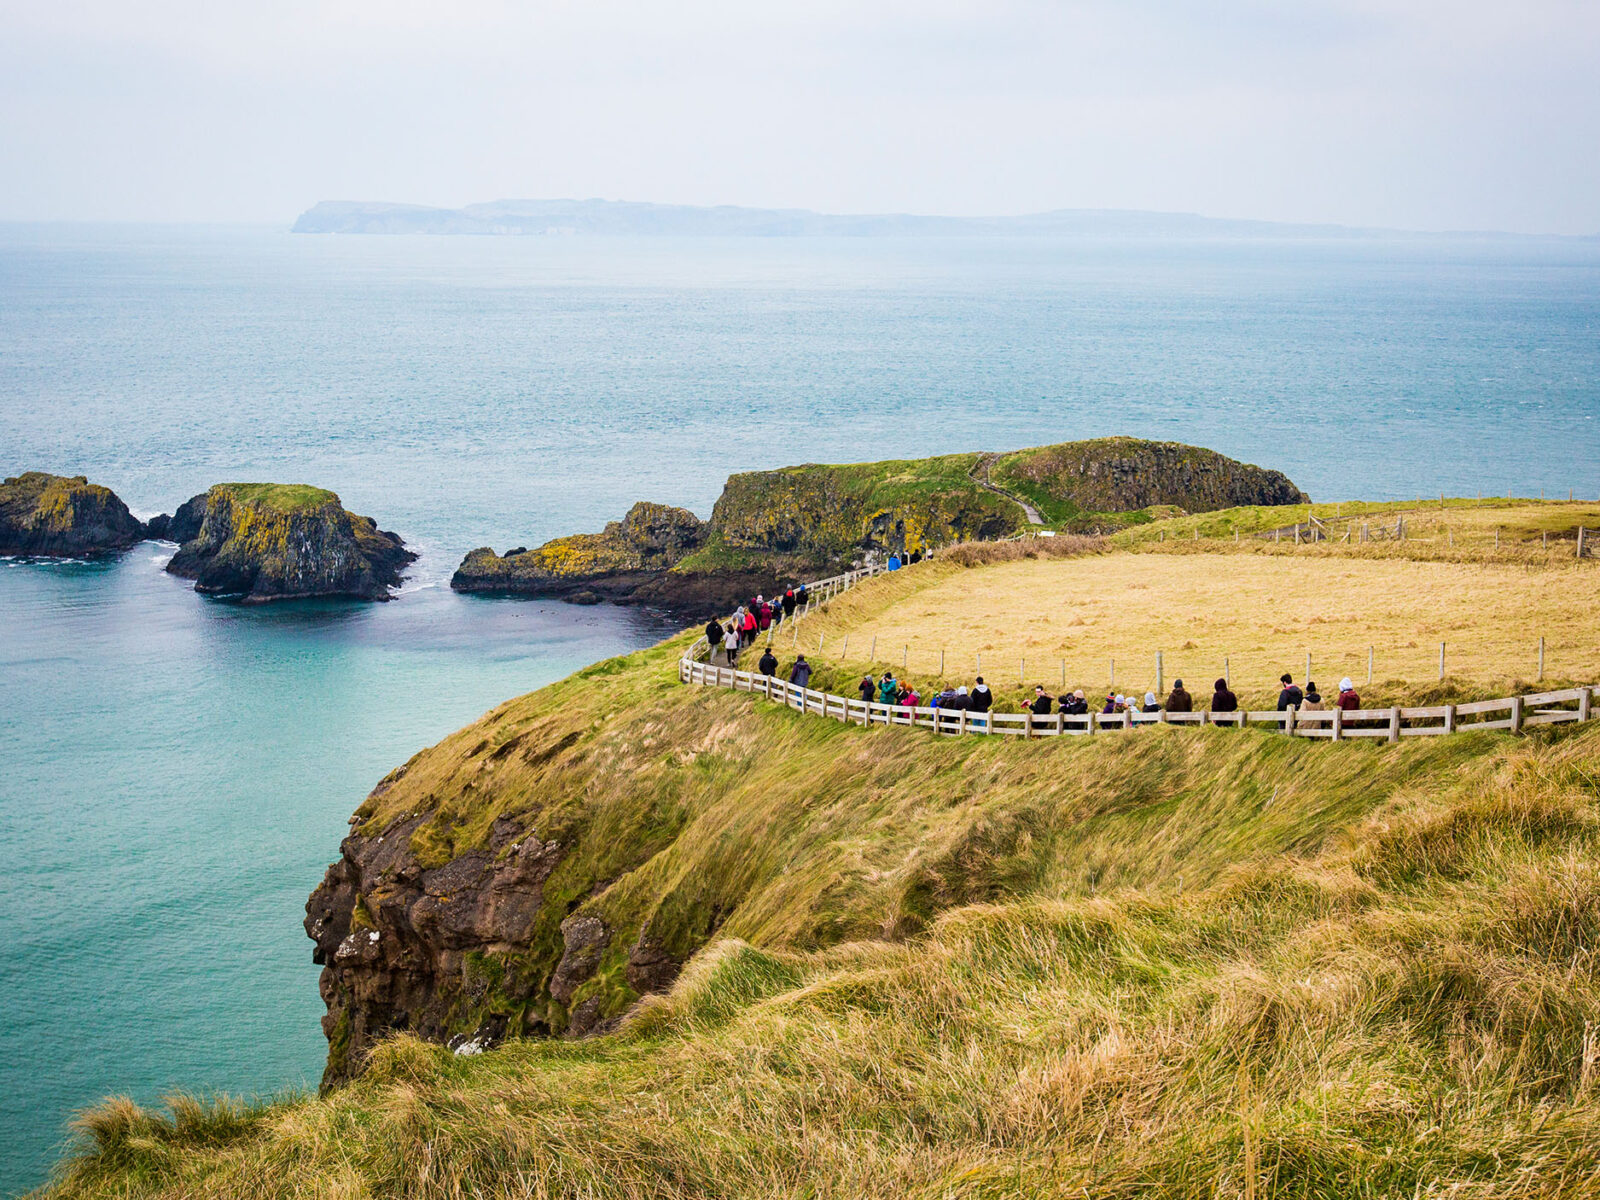 a group of students and tourists walking a path along a cliff side in northern ireland